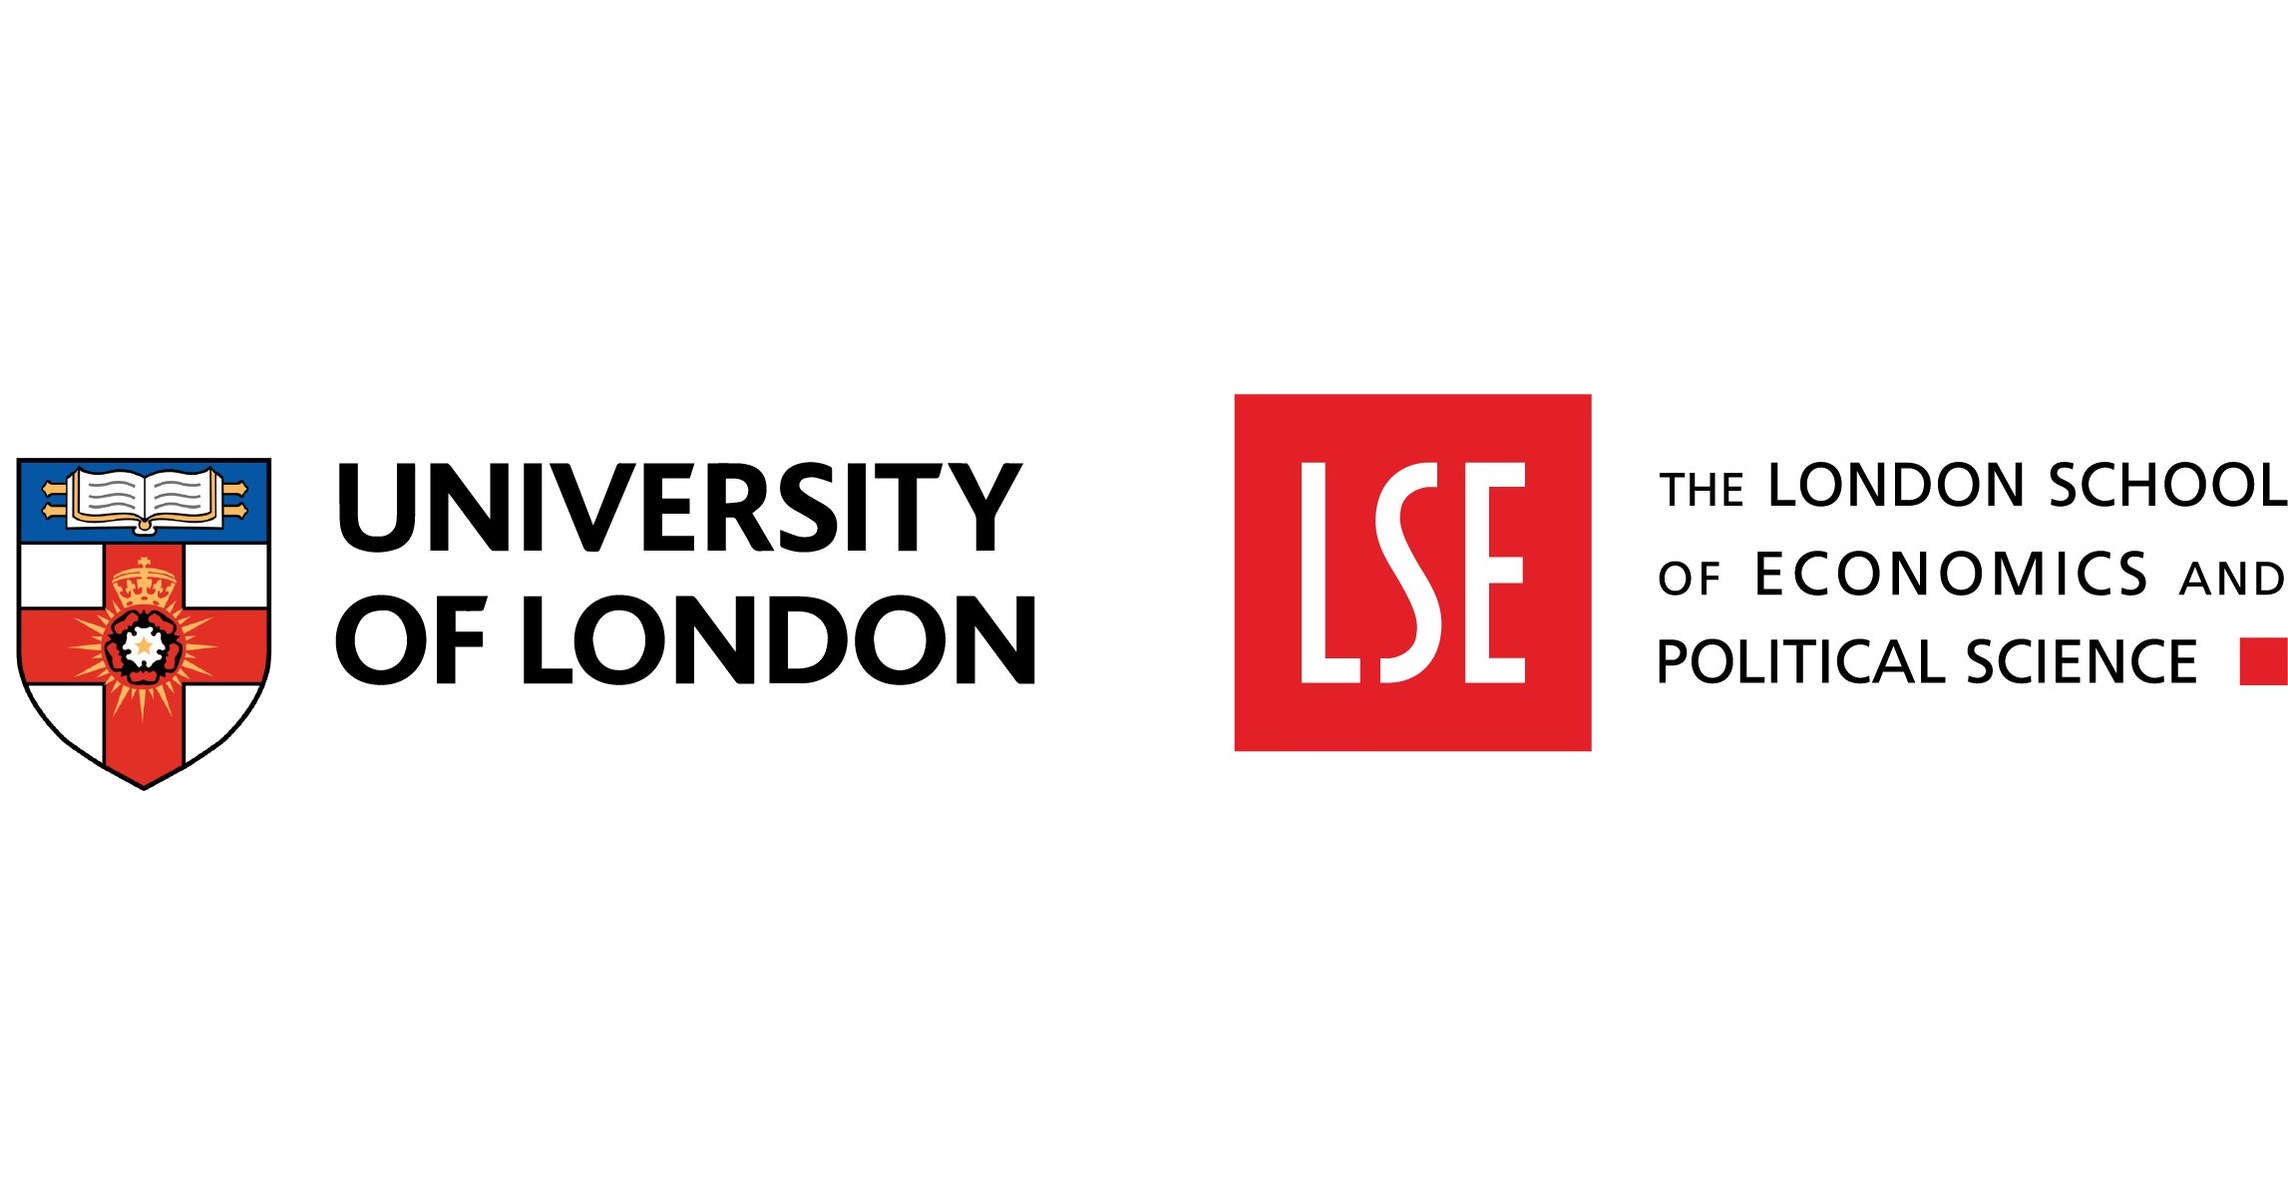 UoL Online Degrees with LSE - We're excited to announce the launch of our  three new online undergraduate programmes awarded by University of London  with academic direction from the globally renowned The